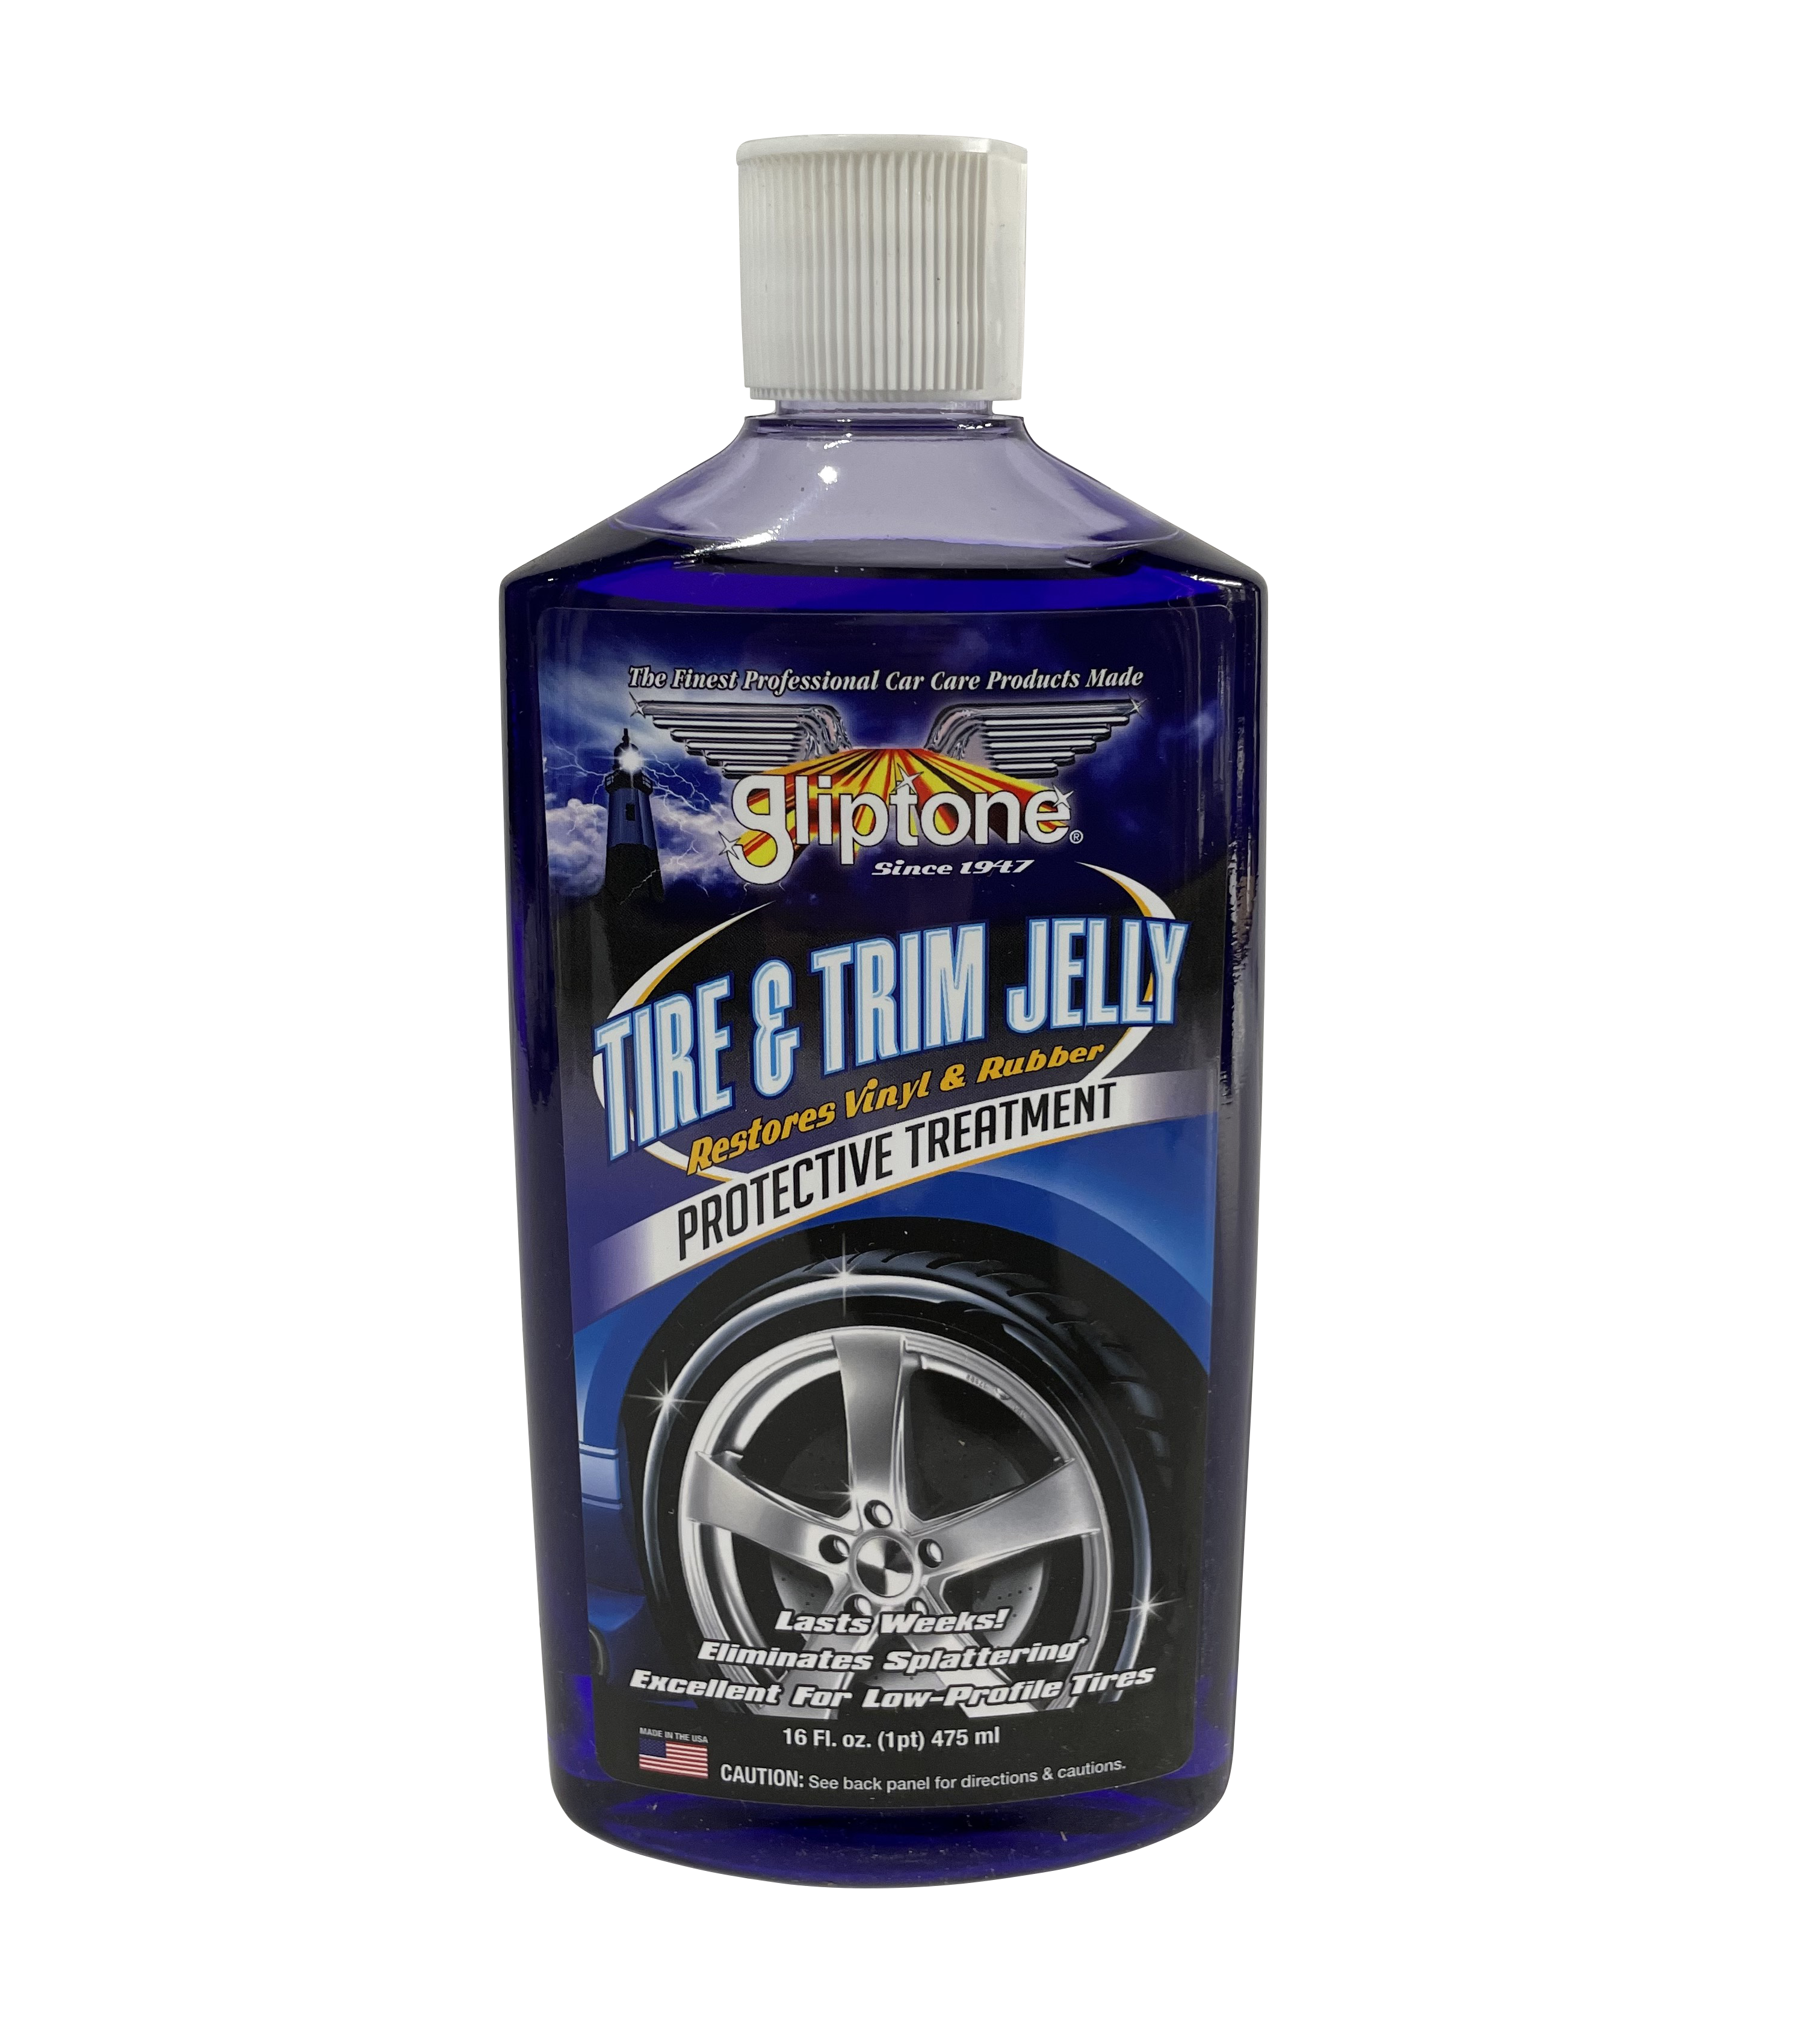 Tire & Trim Jelly Protective Treatment